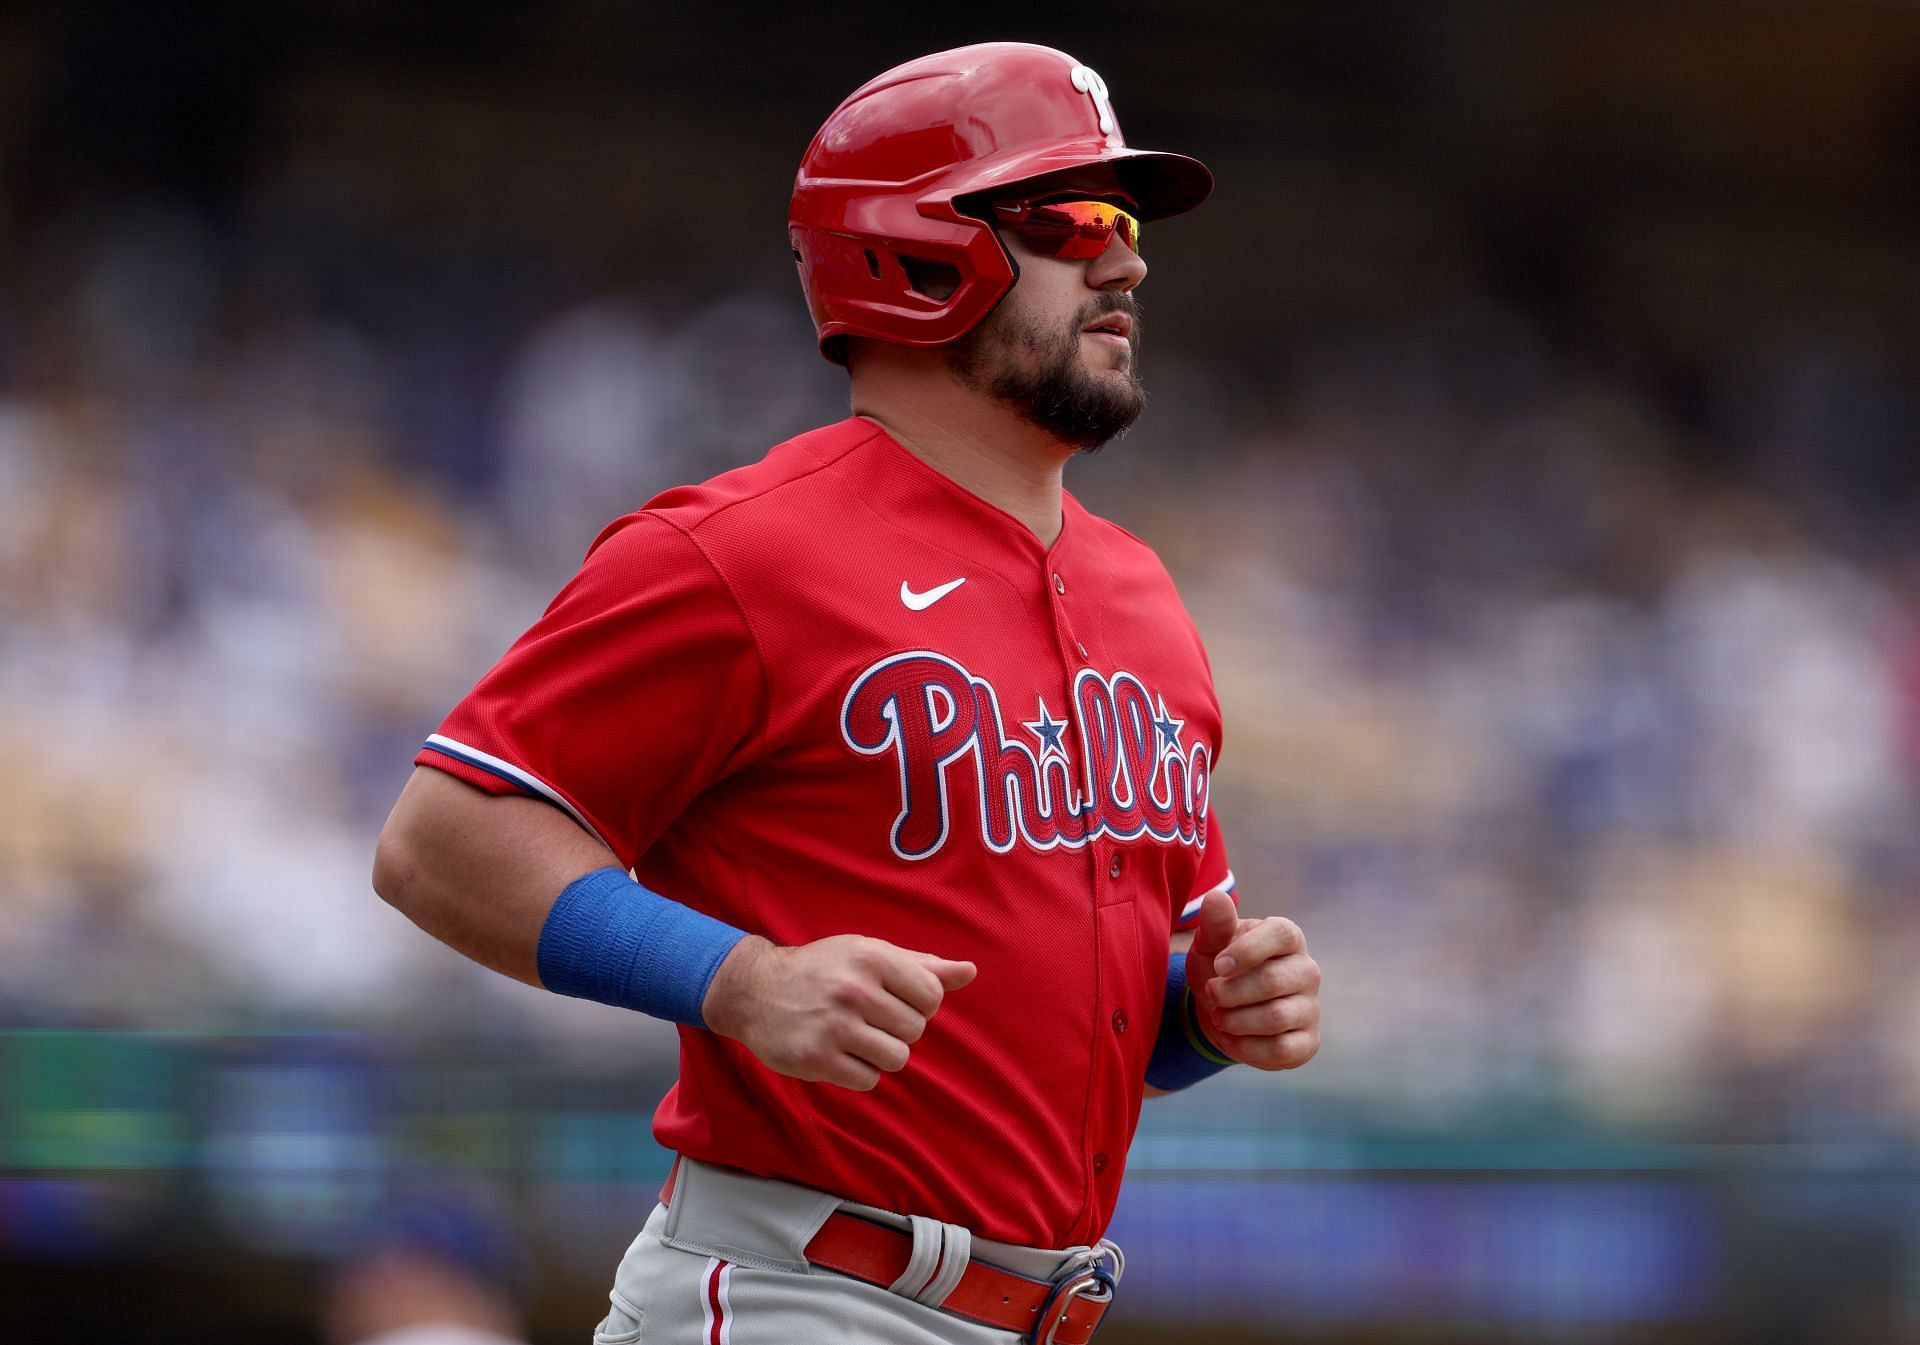 Philadelphia Phillies slugger Kyle Schwarber lost his temper this afternoon after watching a close pitch for strike three.